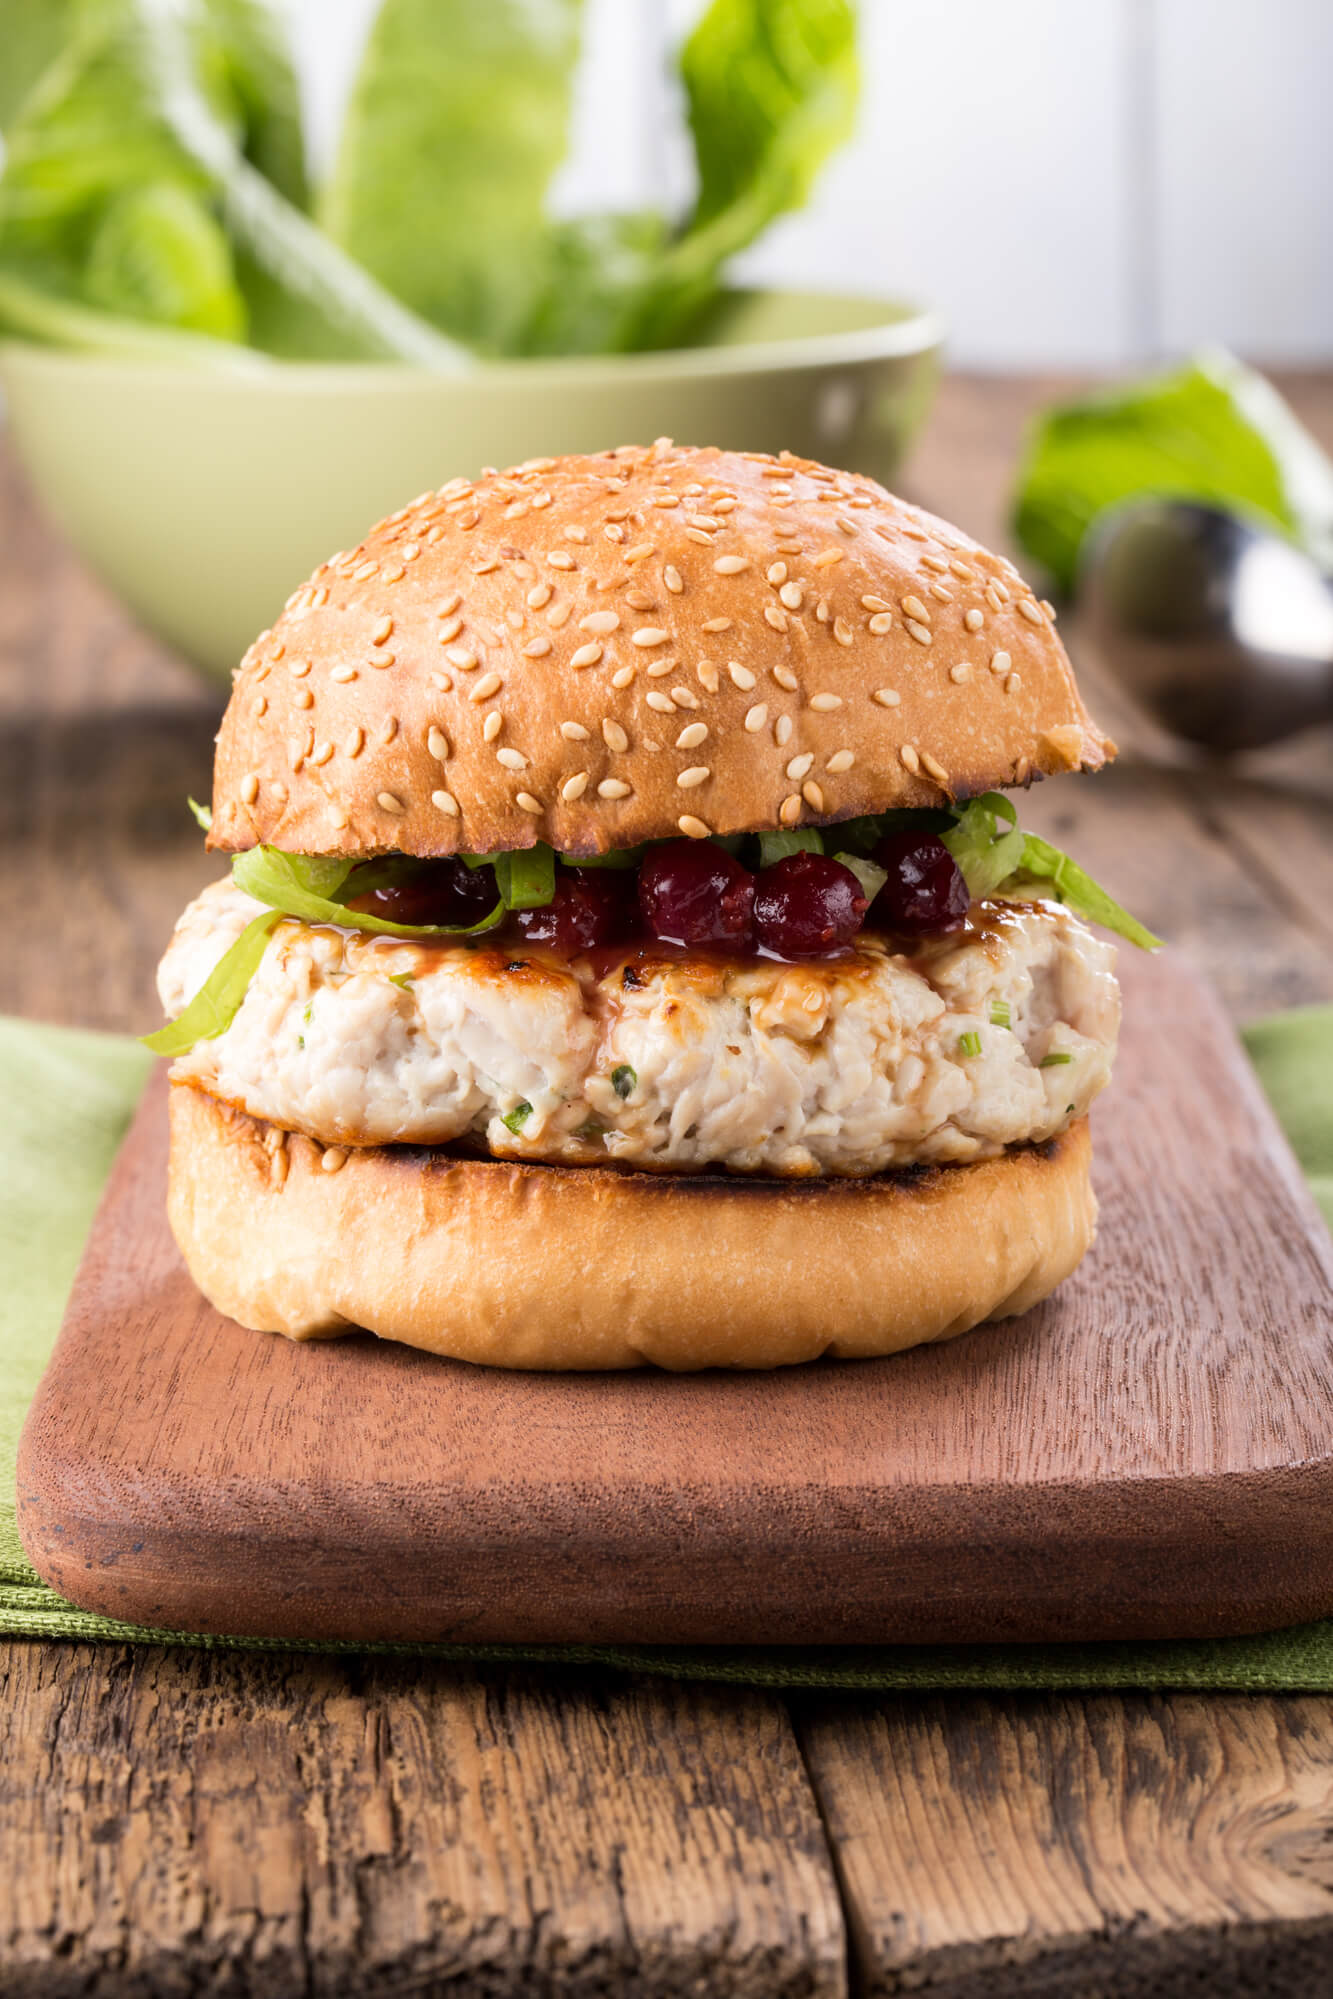 Chicken and zucchini burgers with cranberry sauce on wheat bread.